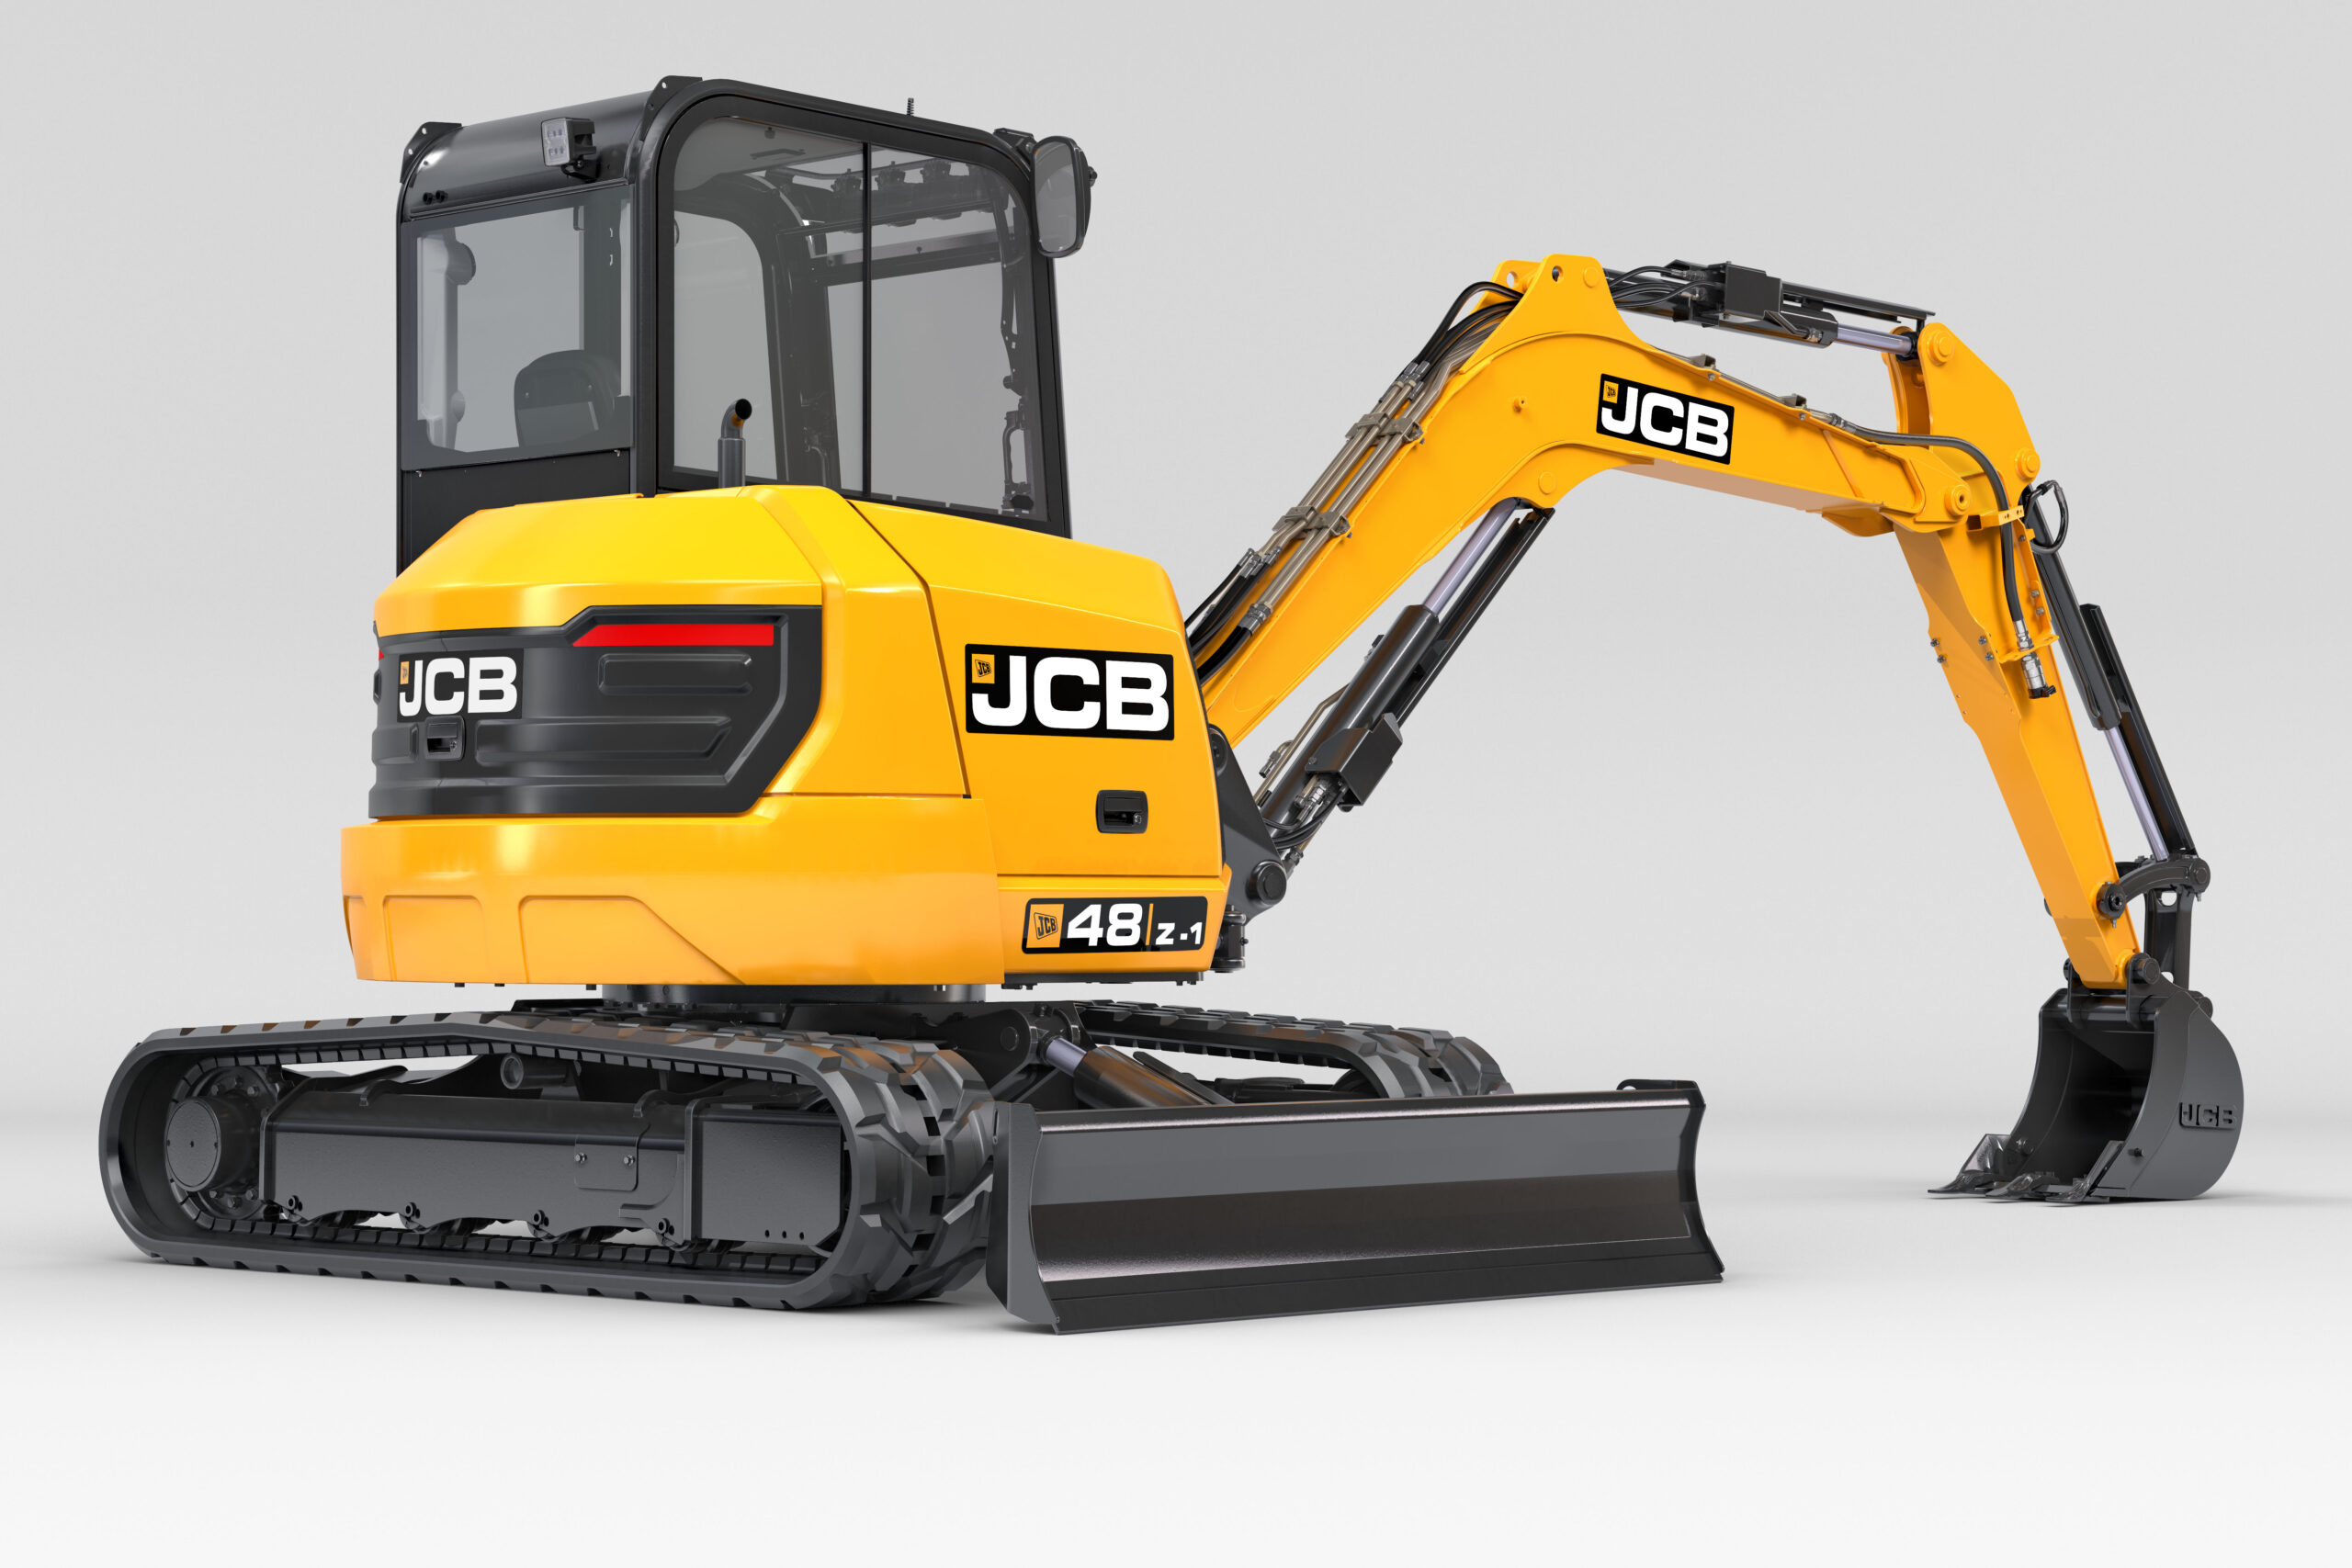 Choosing the right Mini excavators for the project